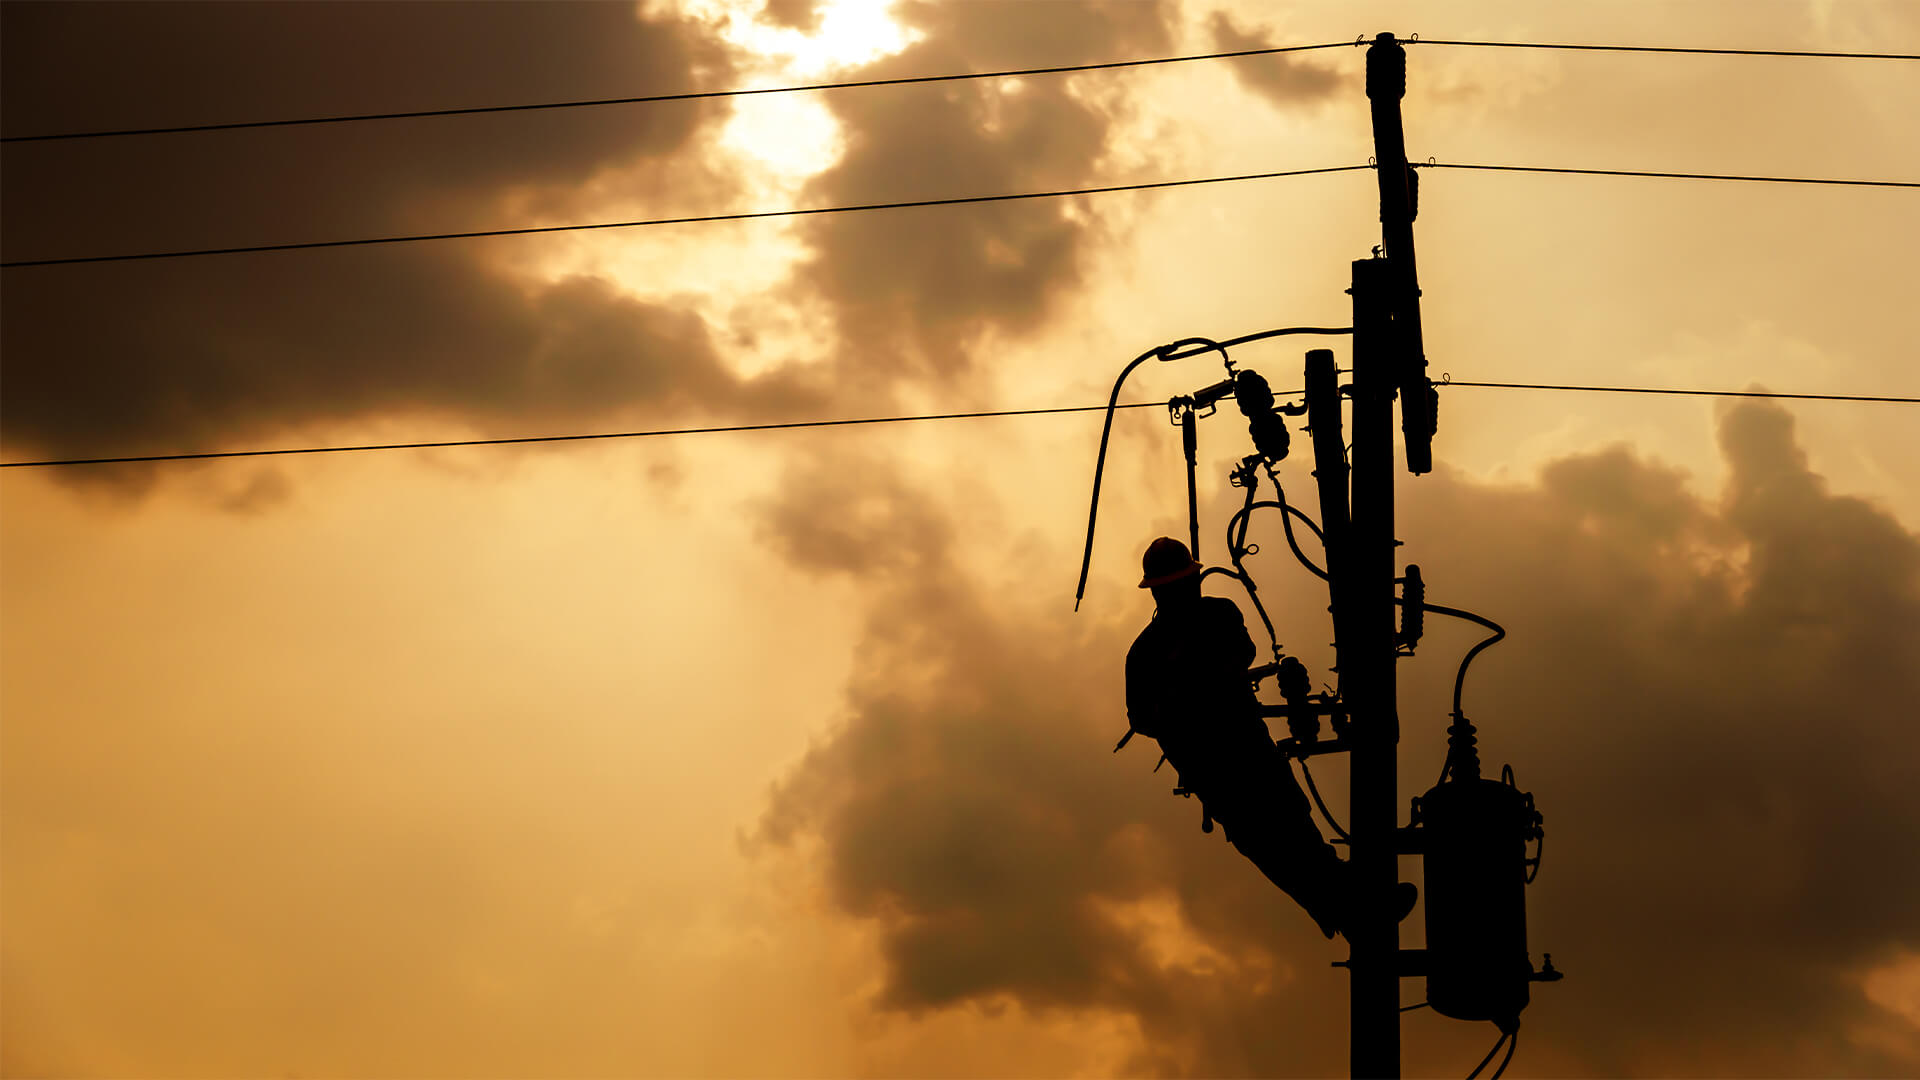 The silhouette of power lineman climbing on an electric pole with a transformer installed